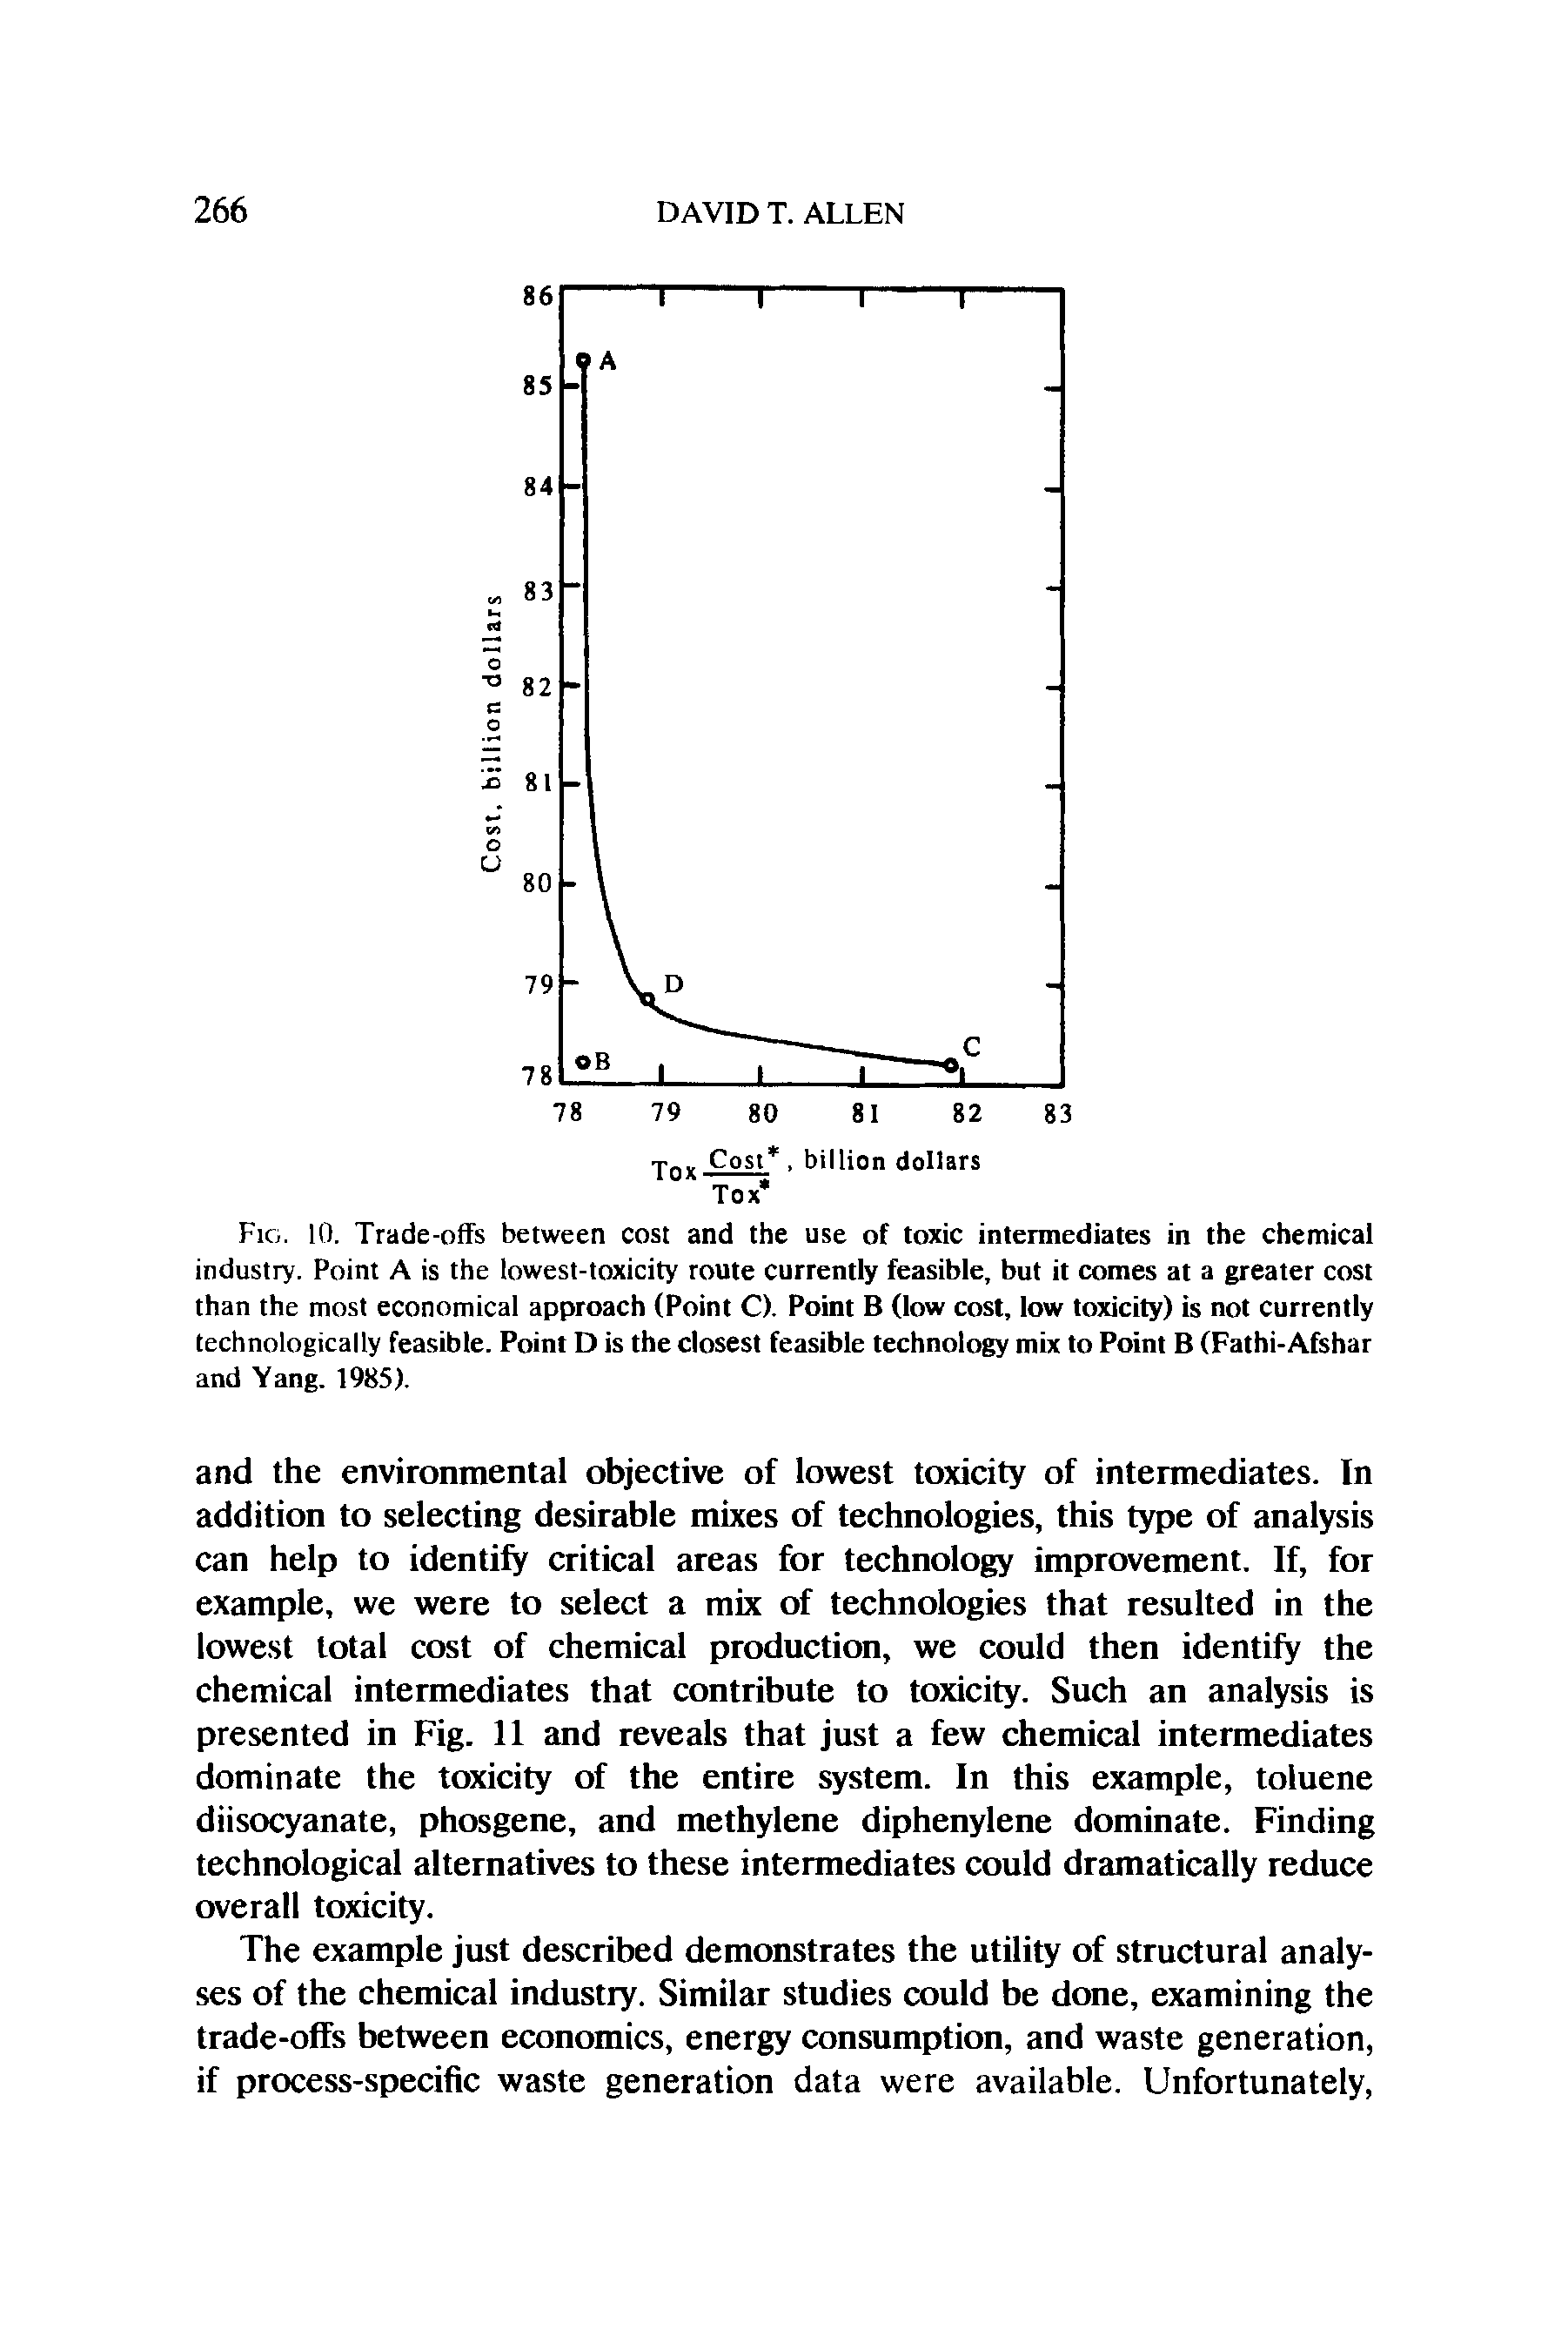 Fig. 10. Trade-offs between cost and the use of toxic intermediates in the chemical industry. Point A is the lowest-toxicity route currently feasible, but it comes at a greater cost than the most economical approach (Point C). Point B (low cost, low toxicity) is not currently technologically feasible. Point D is the closest feasible technology mix to Point B (Fathi-Afshar and Yang. 1985).